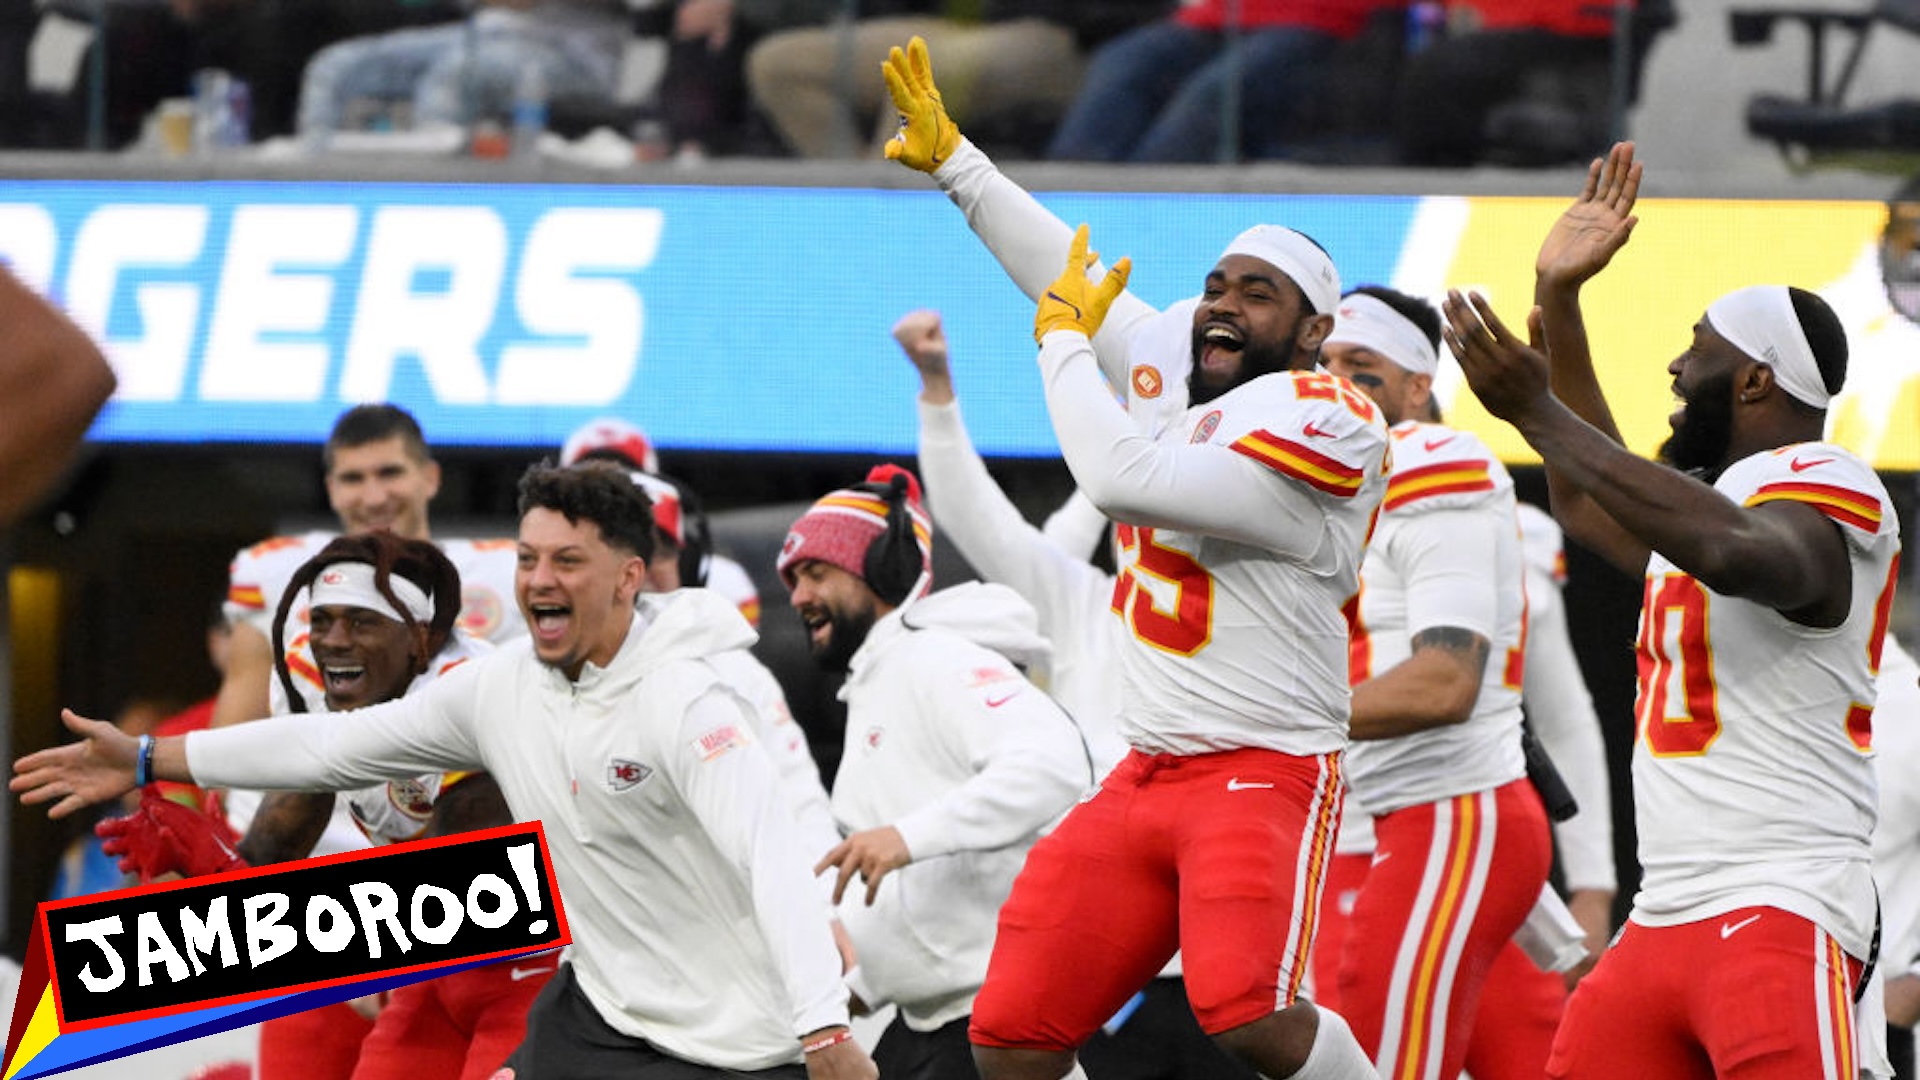 Quarterback Patrick Mahomes, left, along with running back Clyde Edwards-Helaire #25 of the Kansas City Chiefs and teammates react after defensive tackle Chris Jones (not pictured) of the Kansas City Chiefs reacts after sacking quarterback Easton Stick (not pictured) of the Los Angeles Chargers in the second half of a NFL football game at SoFi Stadium in Inglewood on Sunday, January 7, 2024.